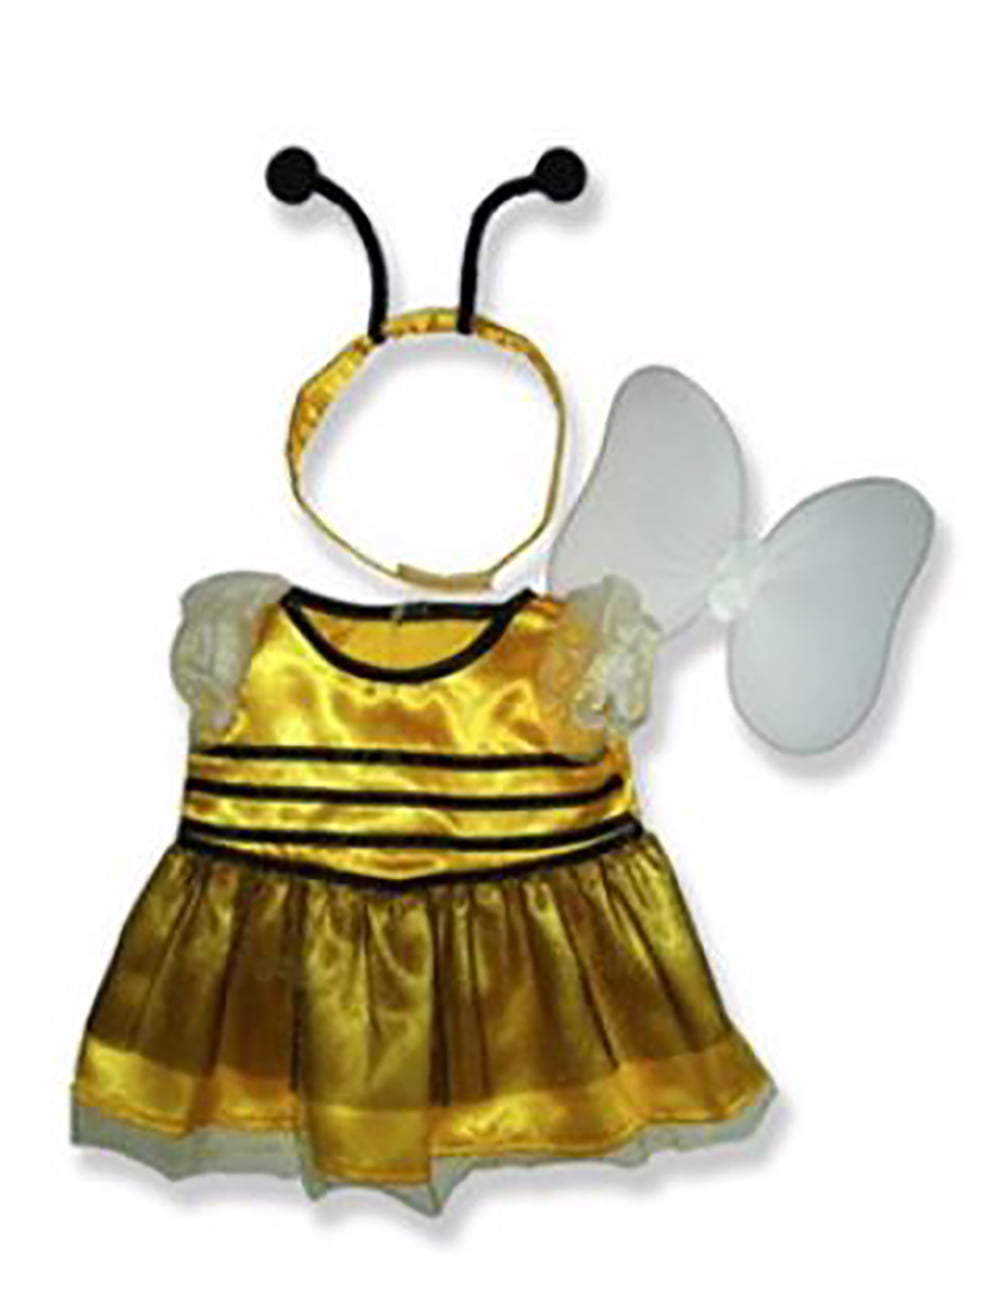 18" Build-a-bear and Make Y Bumble Bee Outfit Teddy Bear Clothes Fits Most 14" 